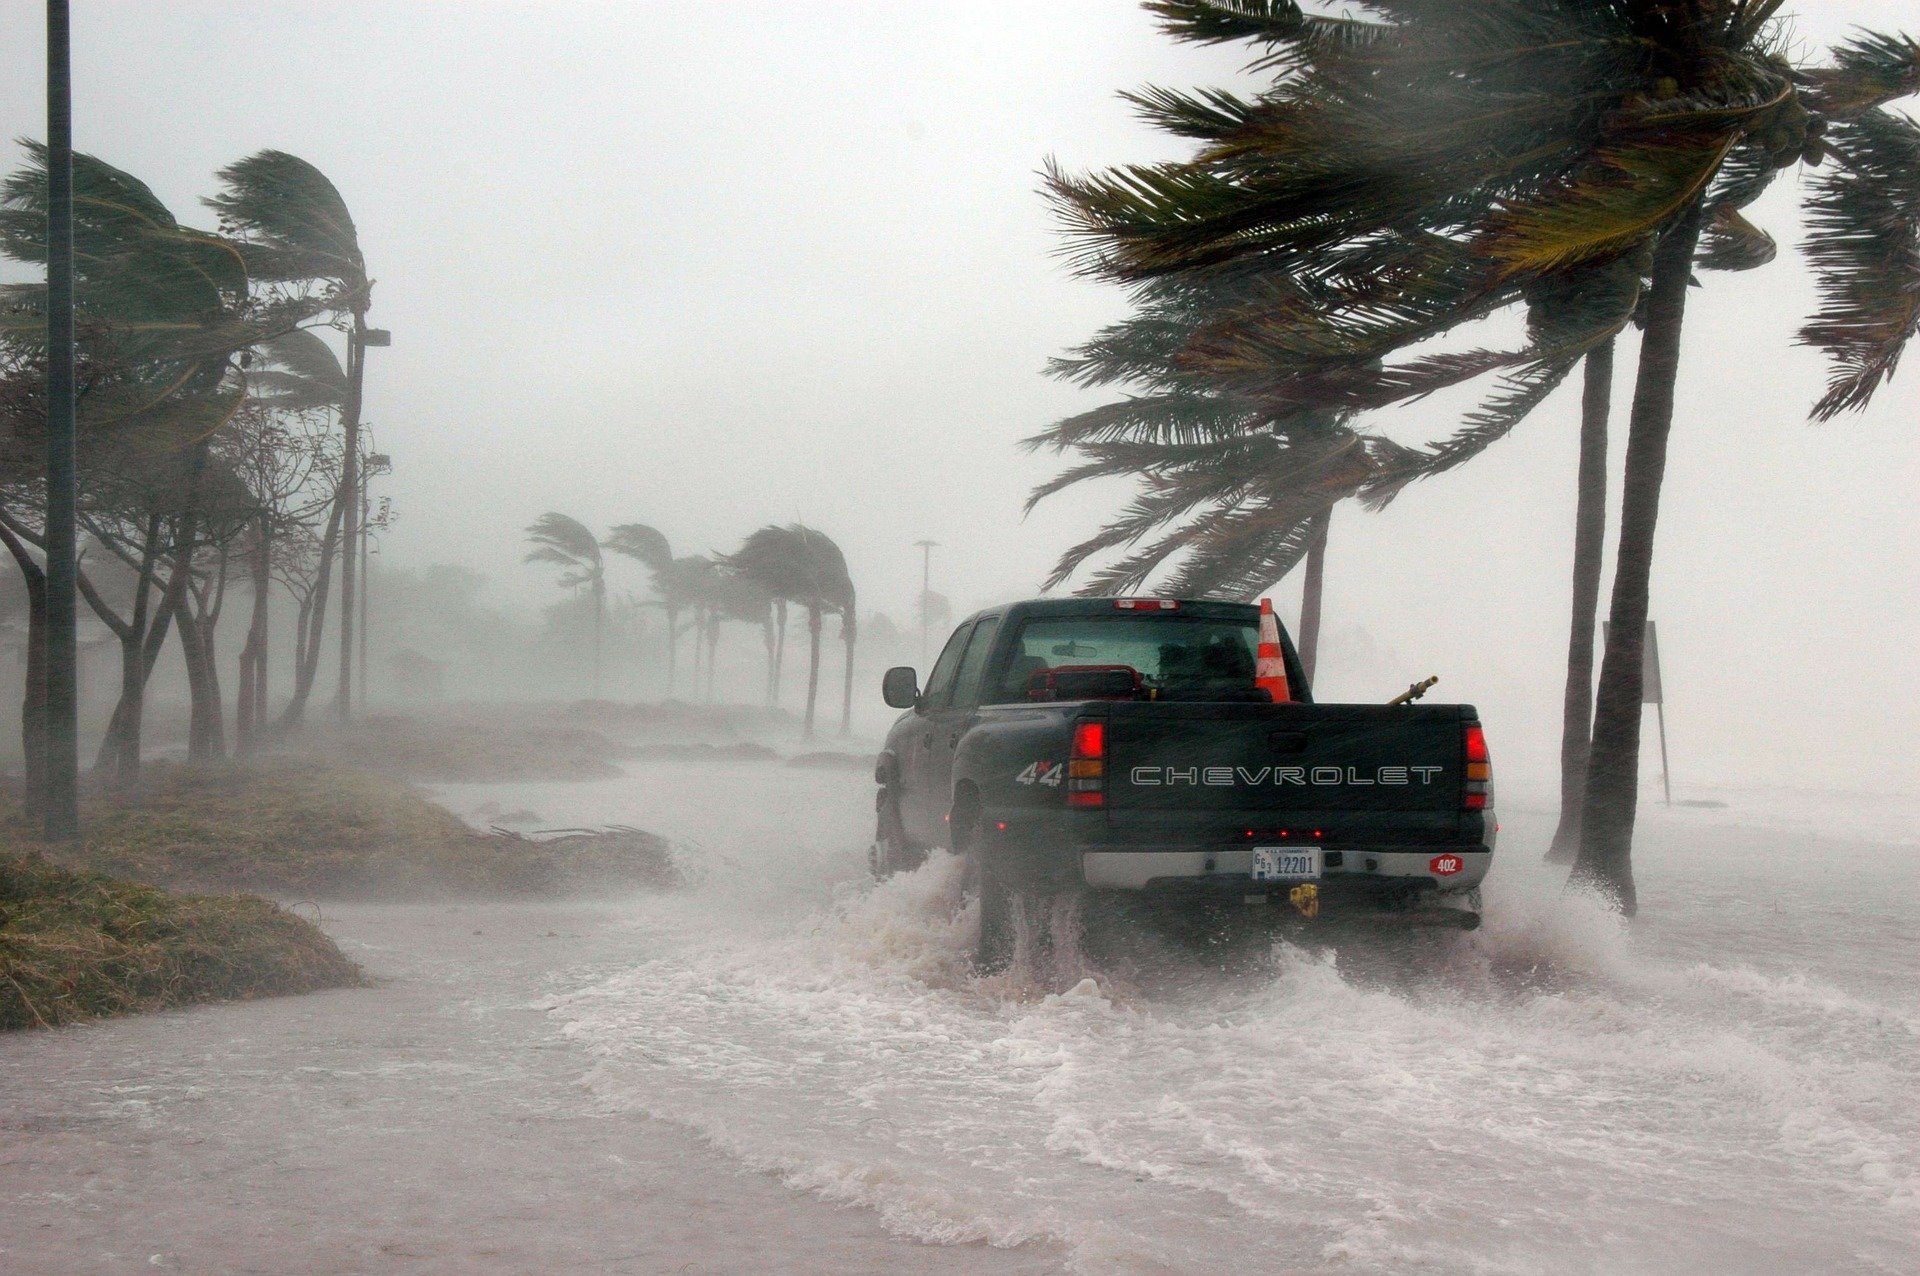 Human-caused warming will cause more slow-moving hurricanes, warn climatologists